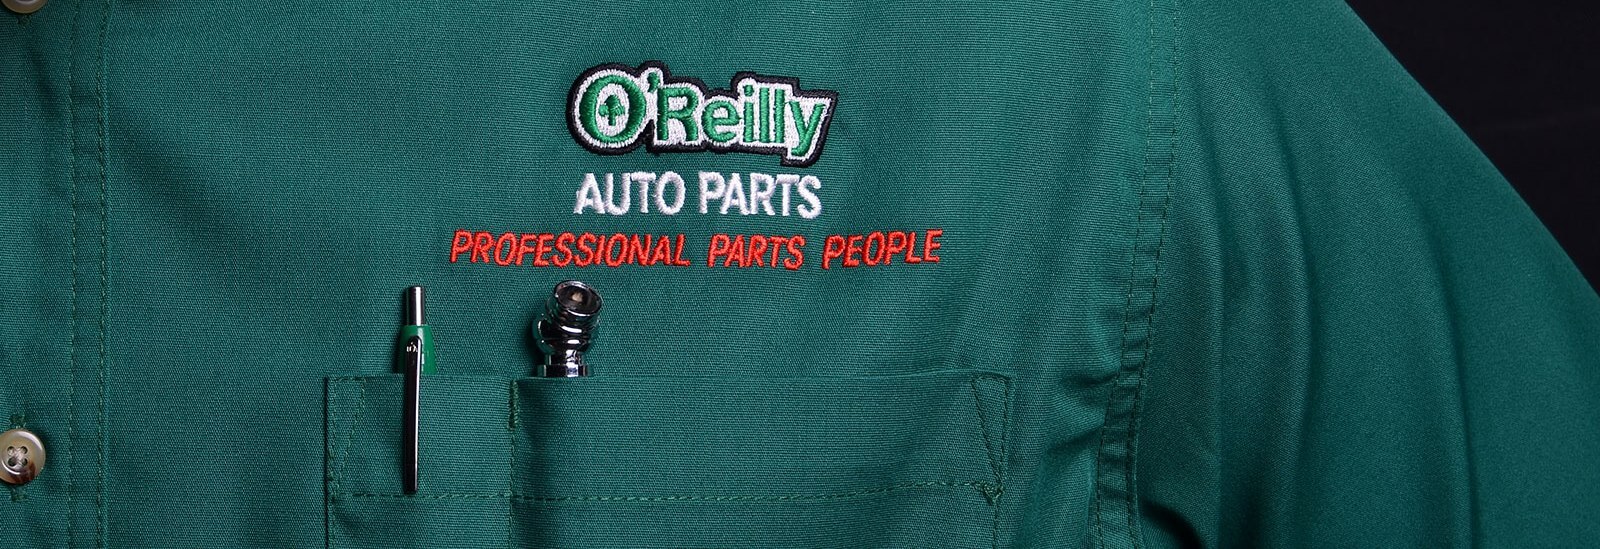 oreilly auto parts careers